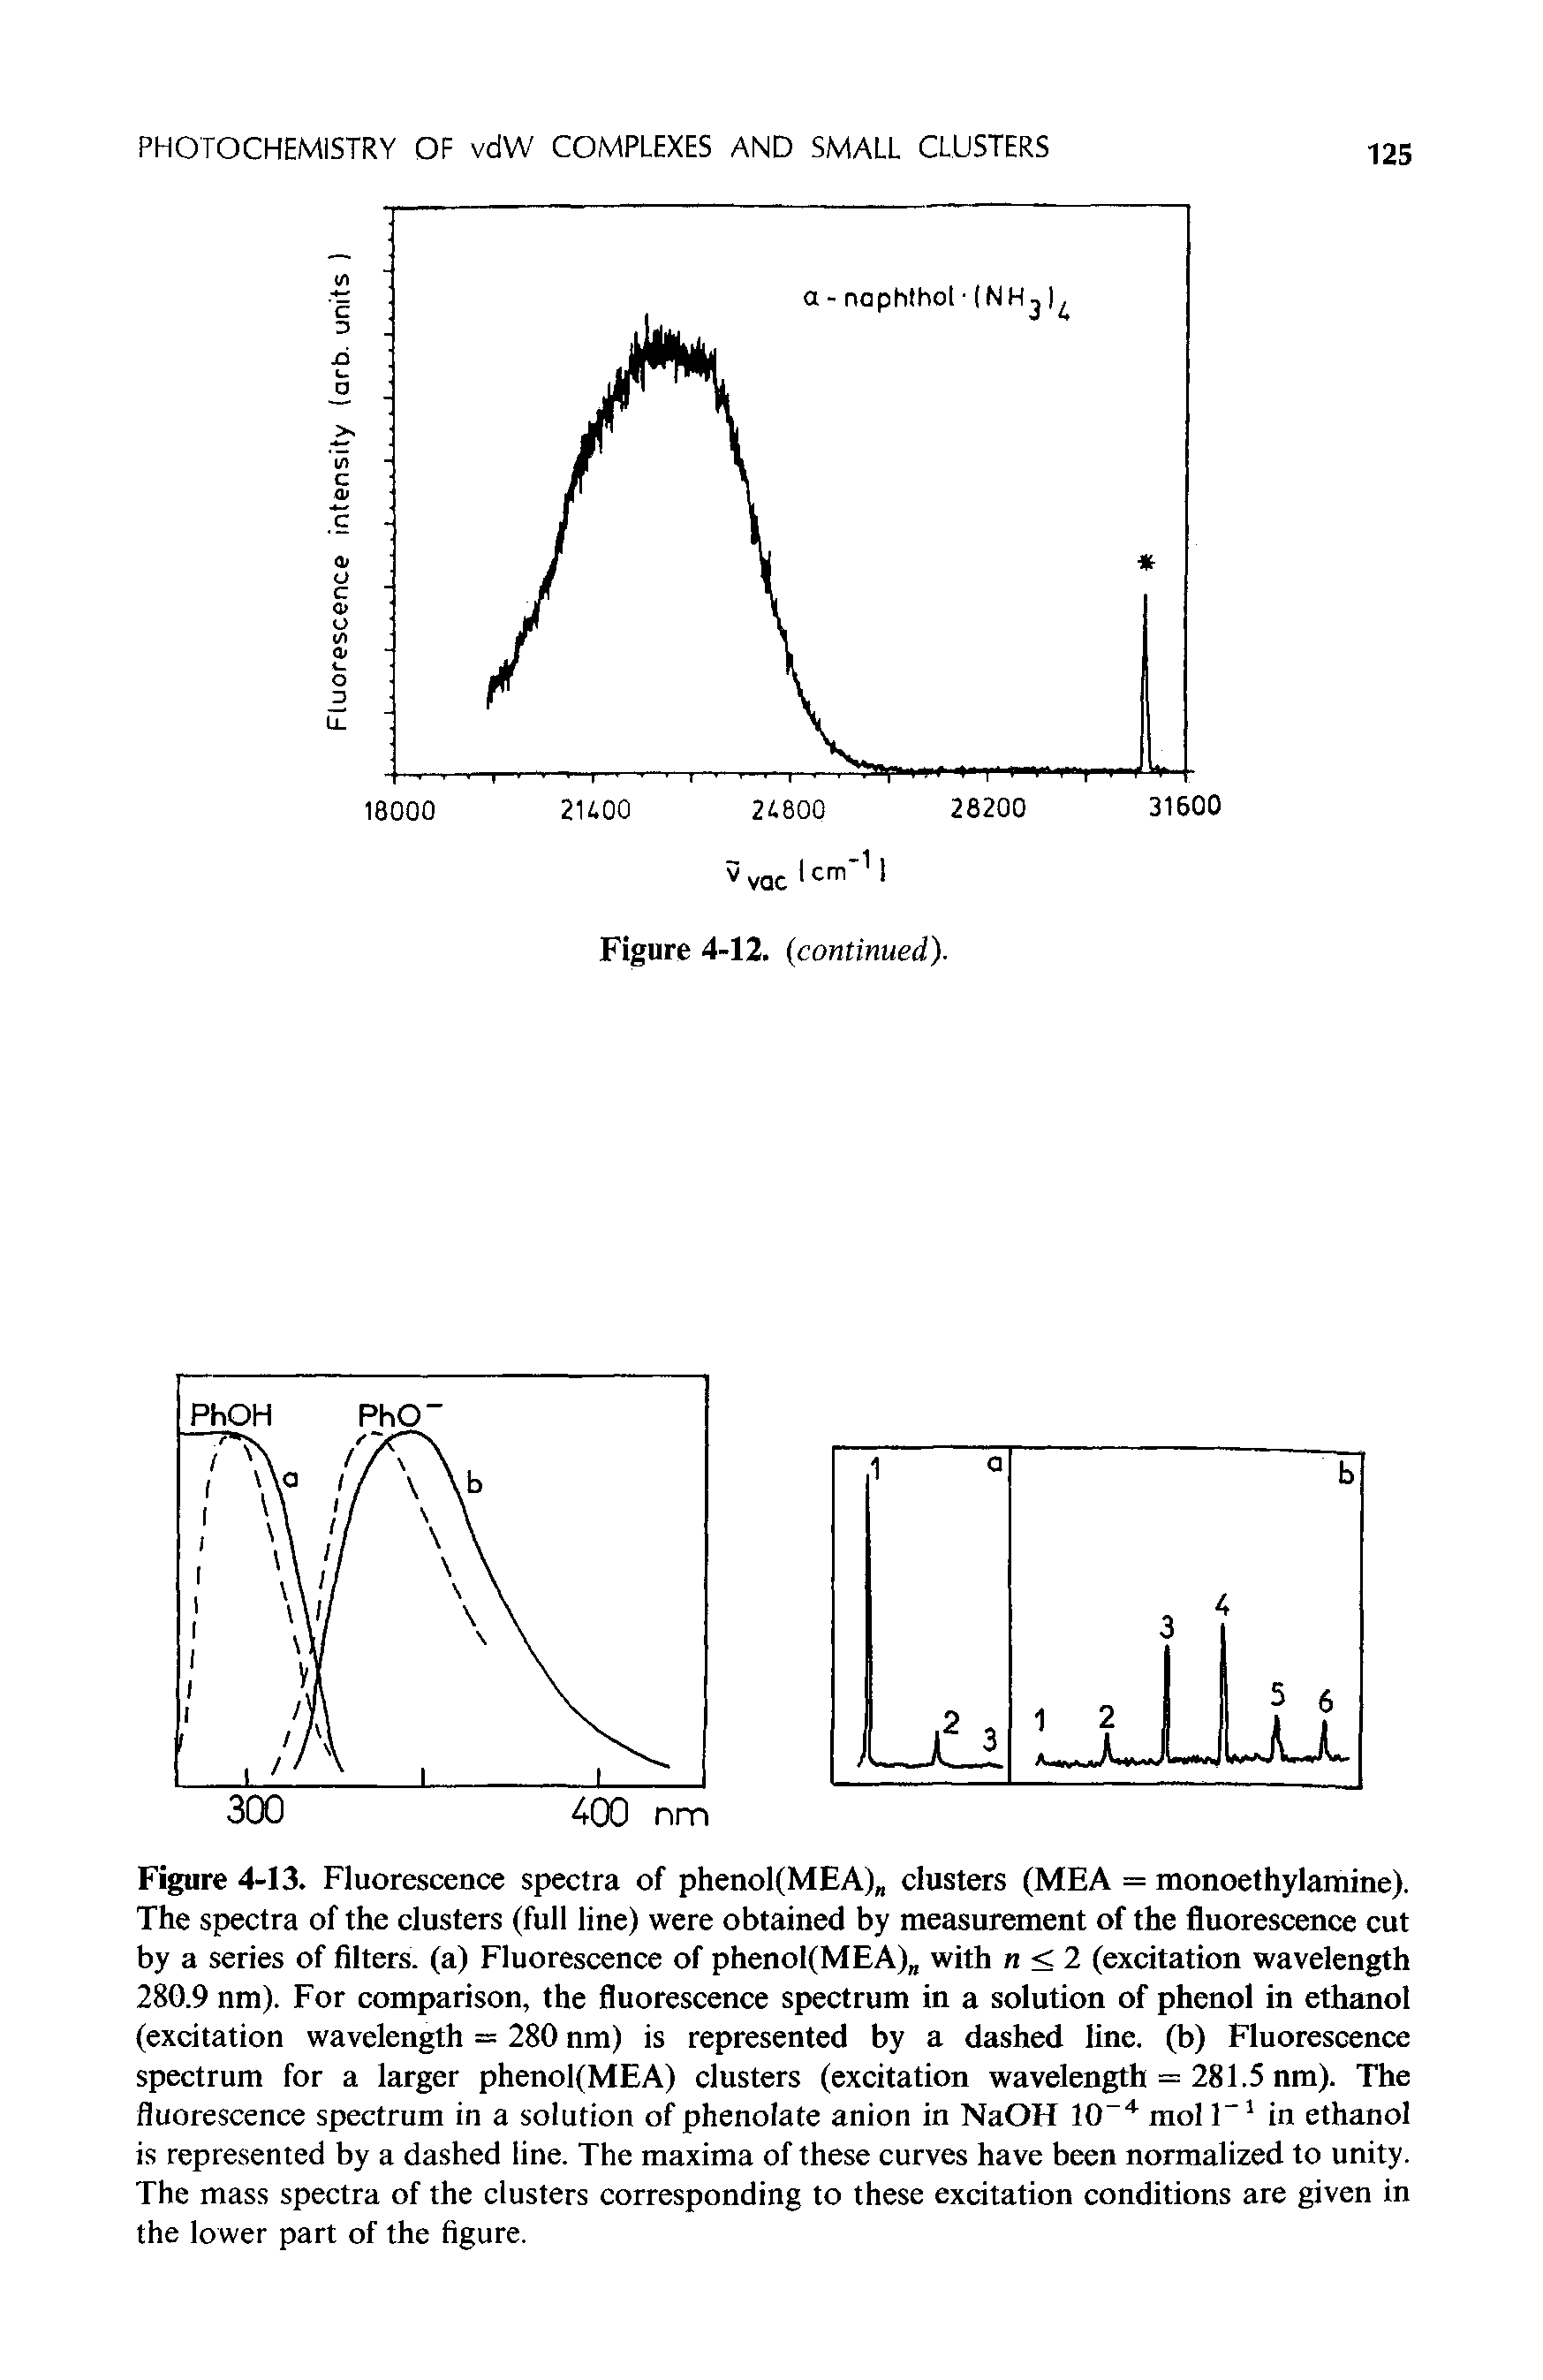 Figure 4-13. Fluorescence spectra of phenol(MEA) clusters (MEA = monoethylamine). The spectra of the clusters (full line) were obtained by measurement of the fluorescence cut by a series of filters, (a) Fluorescence of phenol(MEA) with n <2 (excitation wavelength 280.9 nm). For comparison, the fluorescence spectrum in a solution of phenol in ethanol (excitation wavelength = 280 nm) is represented by a dashed line, (b) Fluorescence spectrum for a larger phenol(MEA) clusters (excitation wavelength = 281.5 nm). The fluorescence spectrum in a solution of phenolate anion in NaOH 10-4 mol P1 in ethanol is represented by a dashed line. The maxima of these curves have been normalized to unity. The mass spectra of the clusters corresponding to these excitation conditions are given in the lower part of the figure.